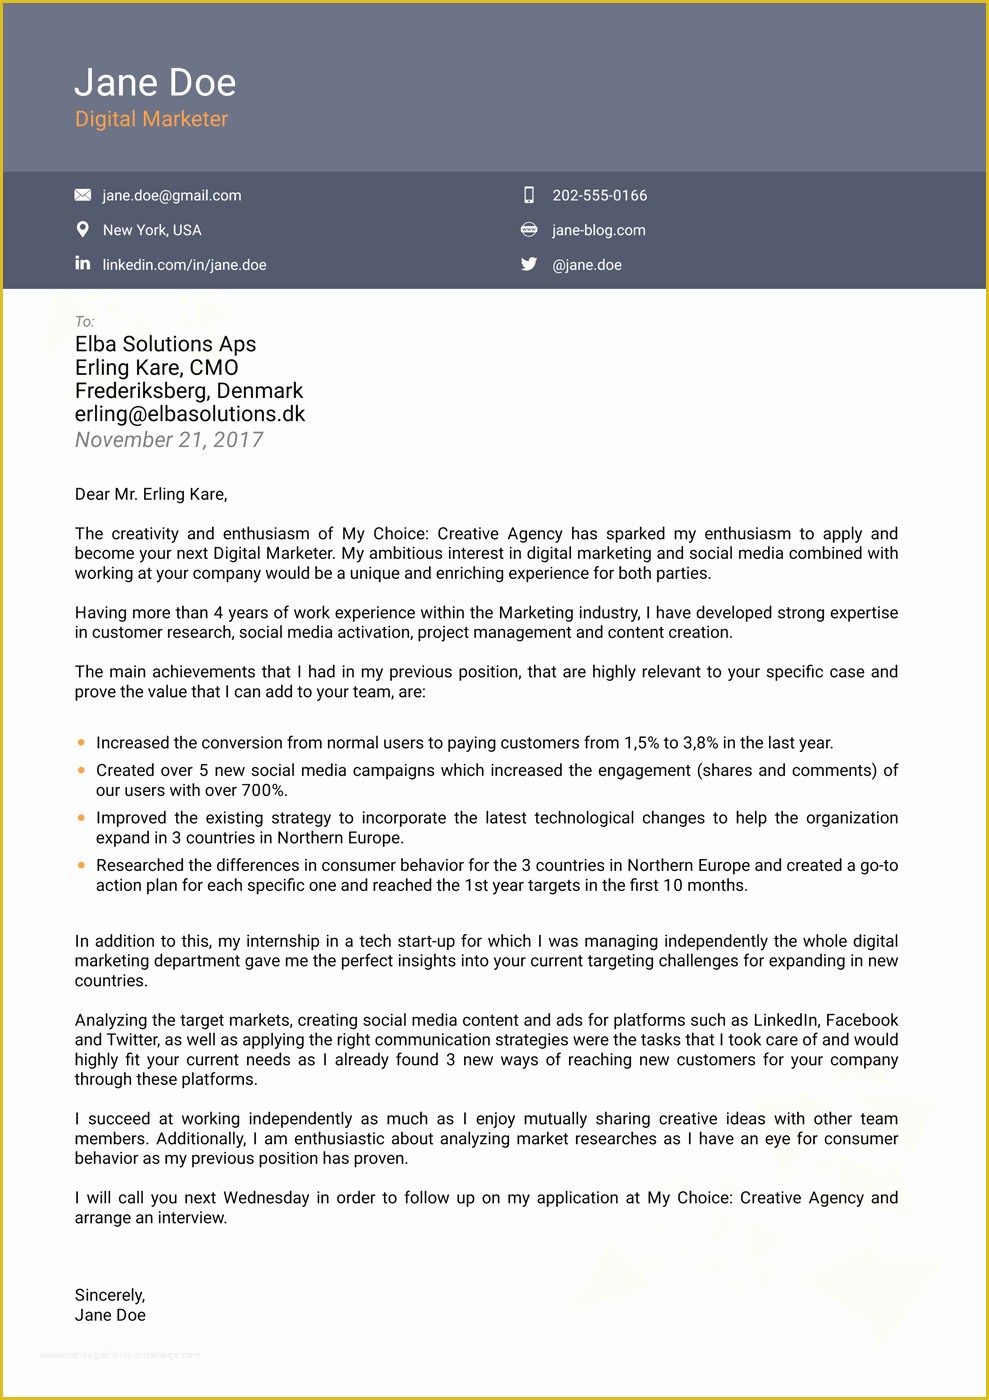 Free Resume Cover Letter Template Download Of 2018 Professional Cover Letter Templates Download now